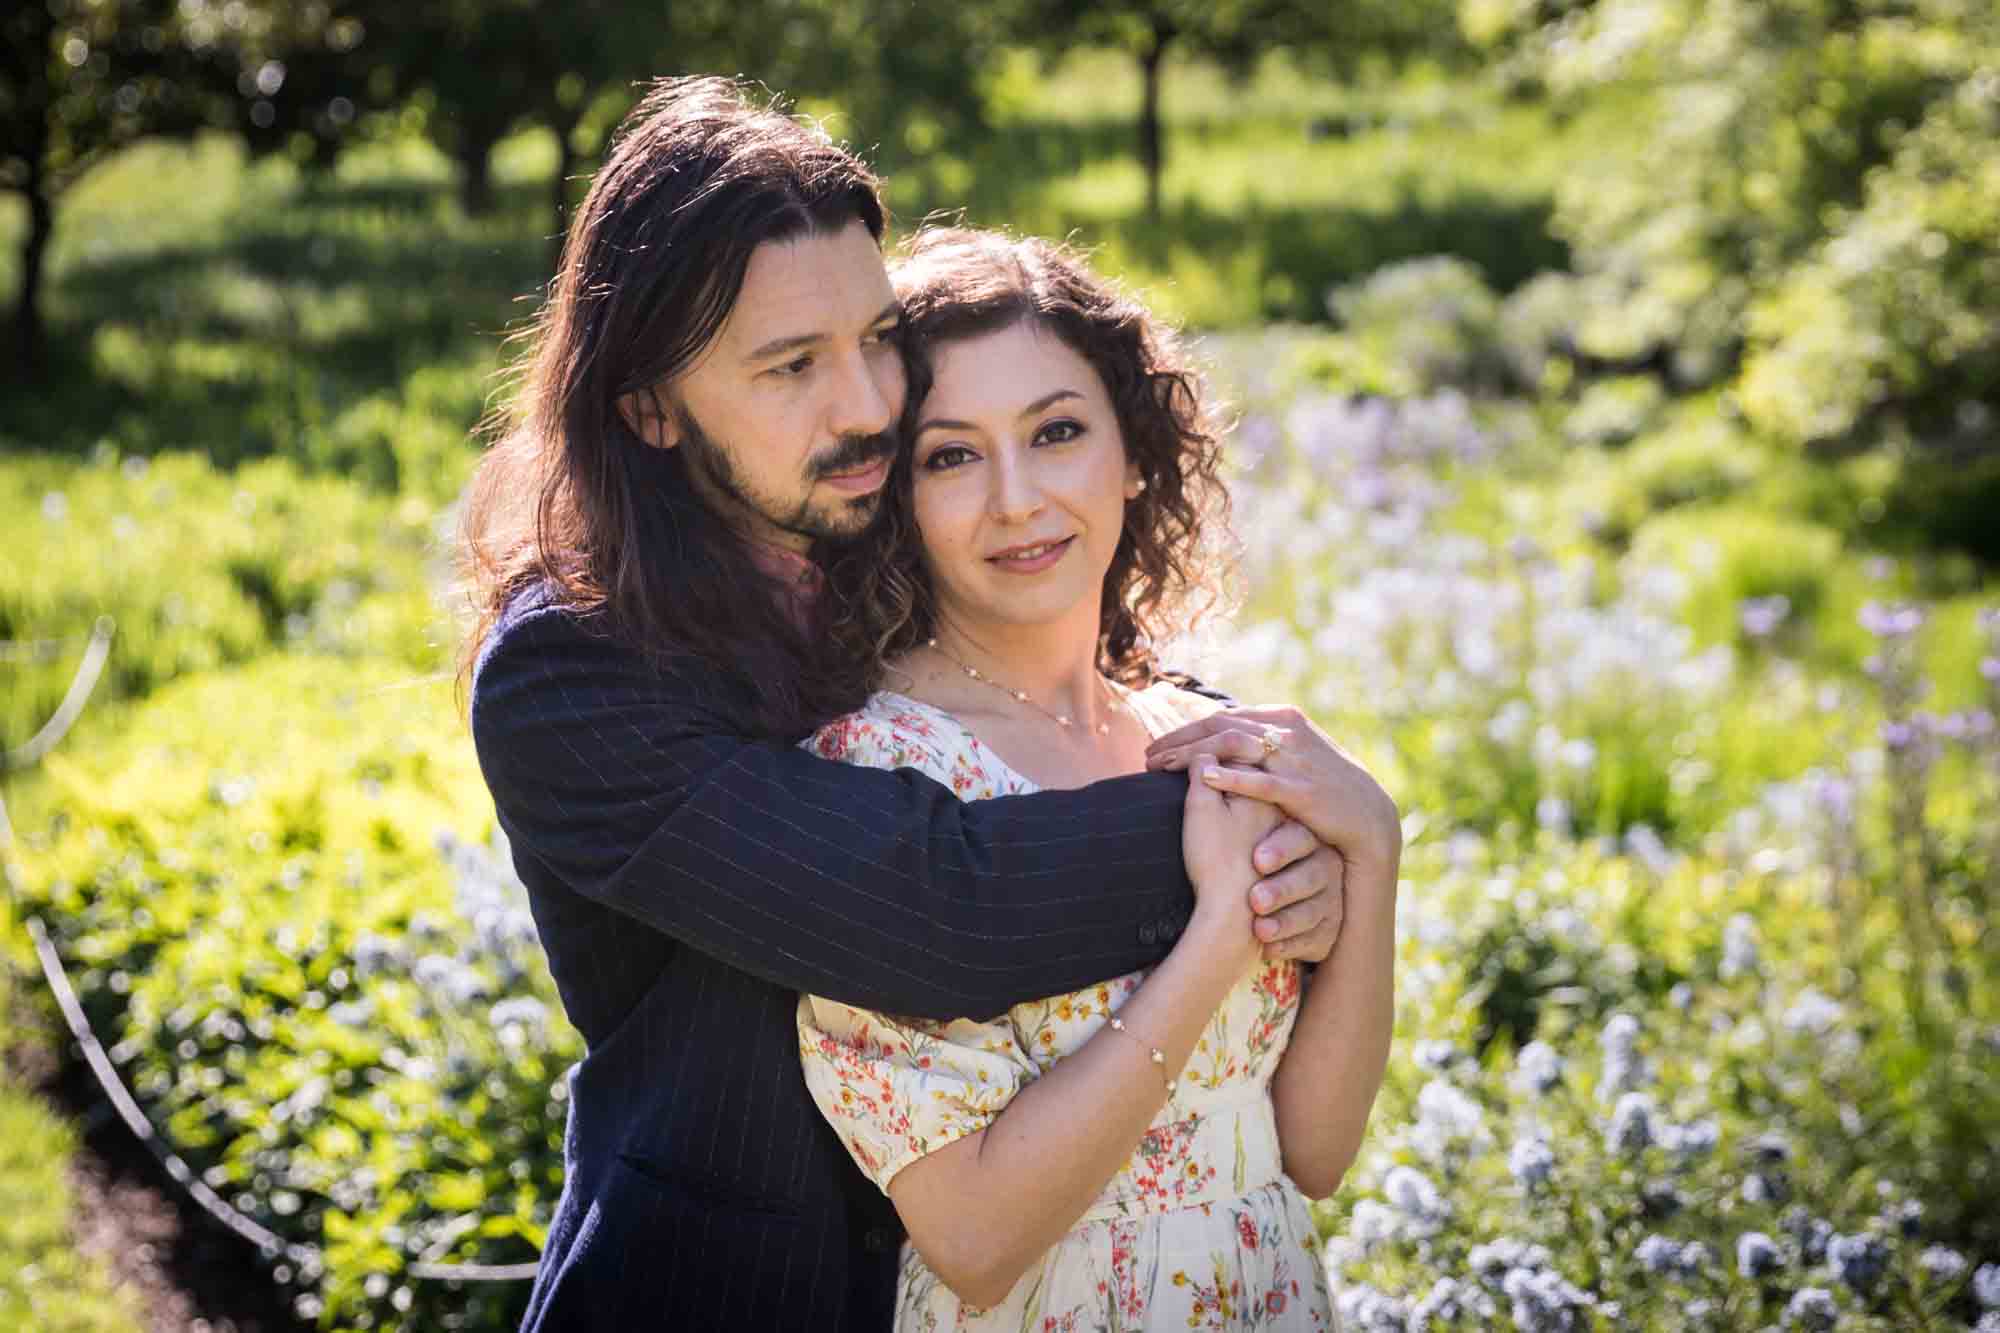 New York Botanical Garden engagement photos of man hugging woman in front of blue bell flowers